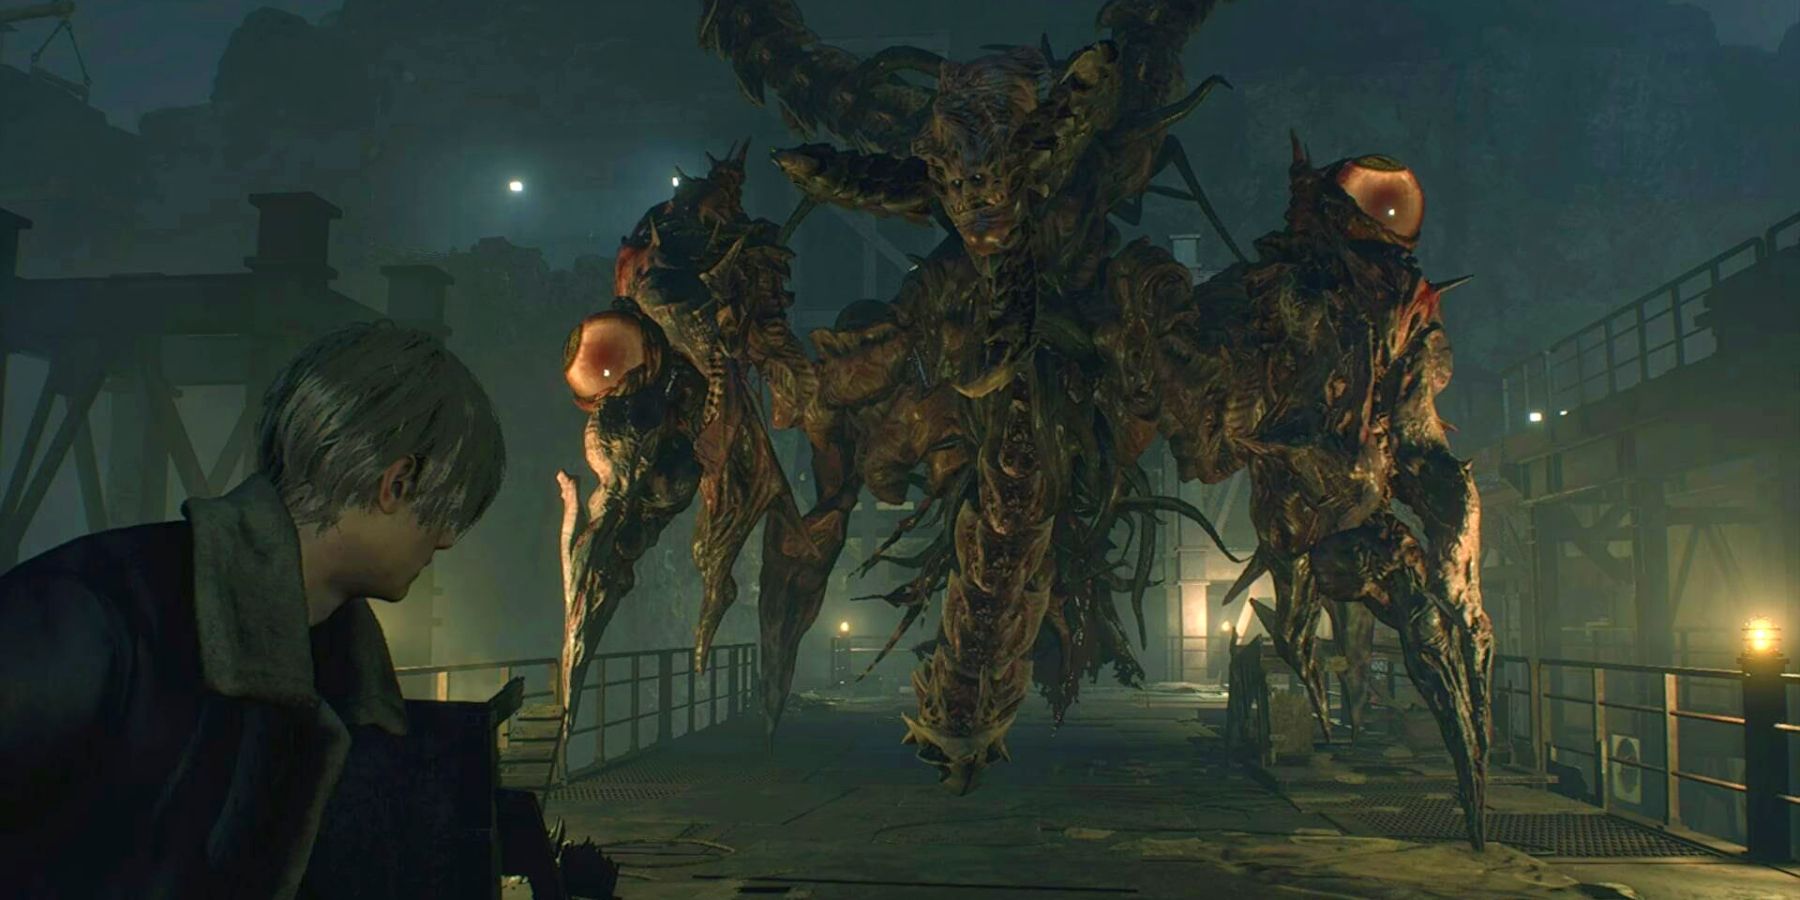 Screenshot from the Resident Evil 4 remake showing protagonist Leon Kennedy facing down the game's final boss, a monster that mutated from Saddler, the game's antagonist and creator of the Las Plagas parasite.